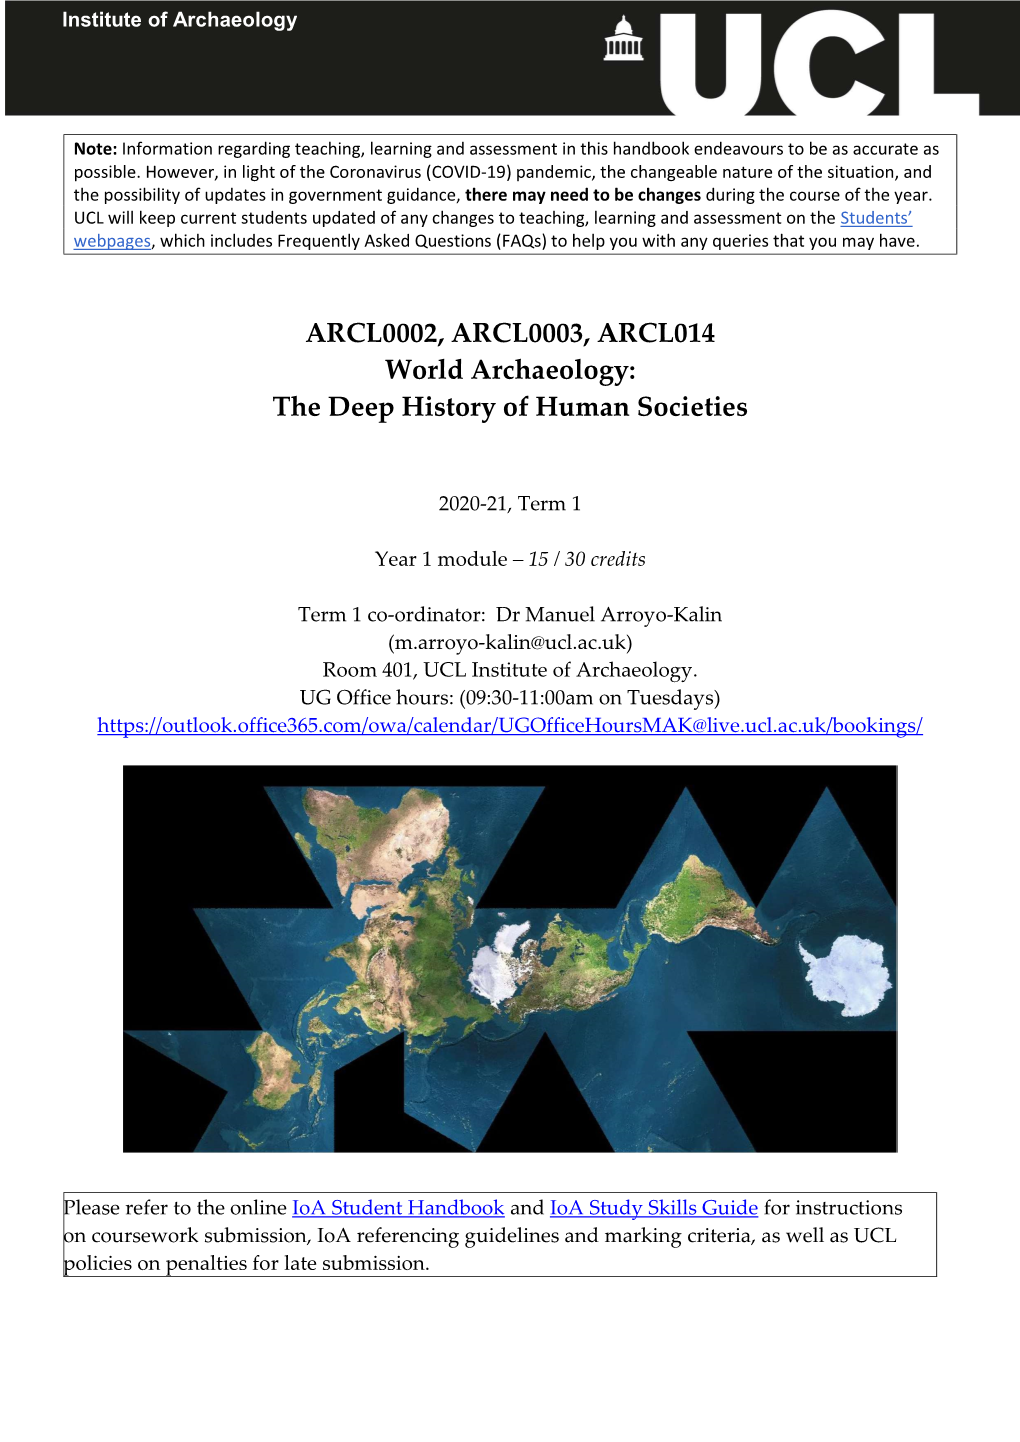 ARCL0002, ARCL0003, ARCL014 World Archaeology: the Deep History of Human Societies